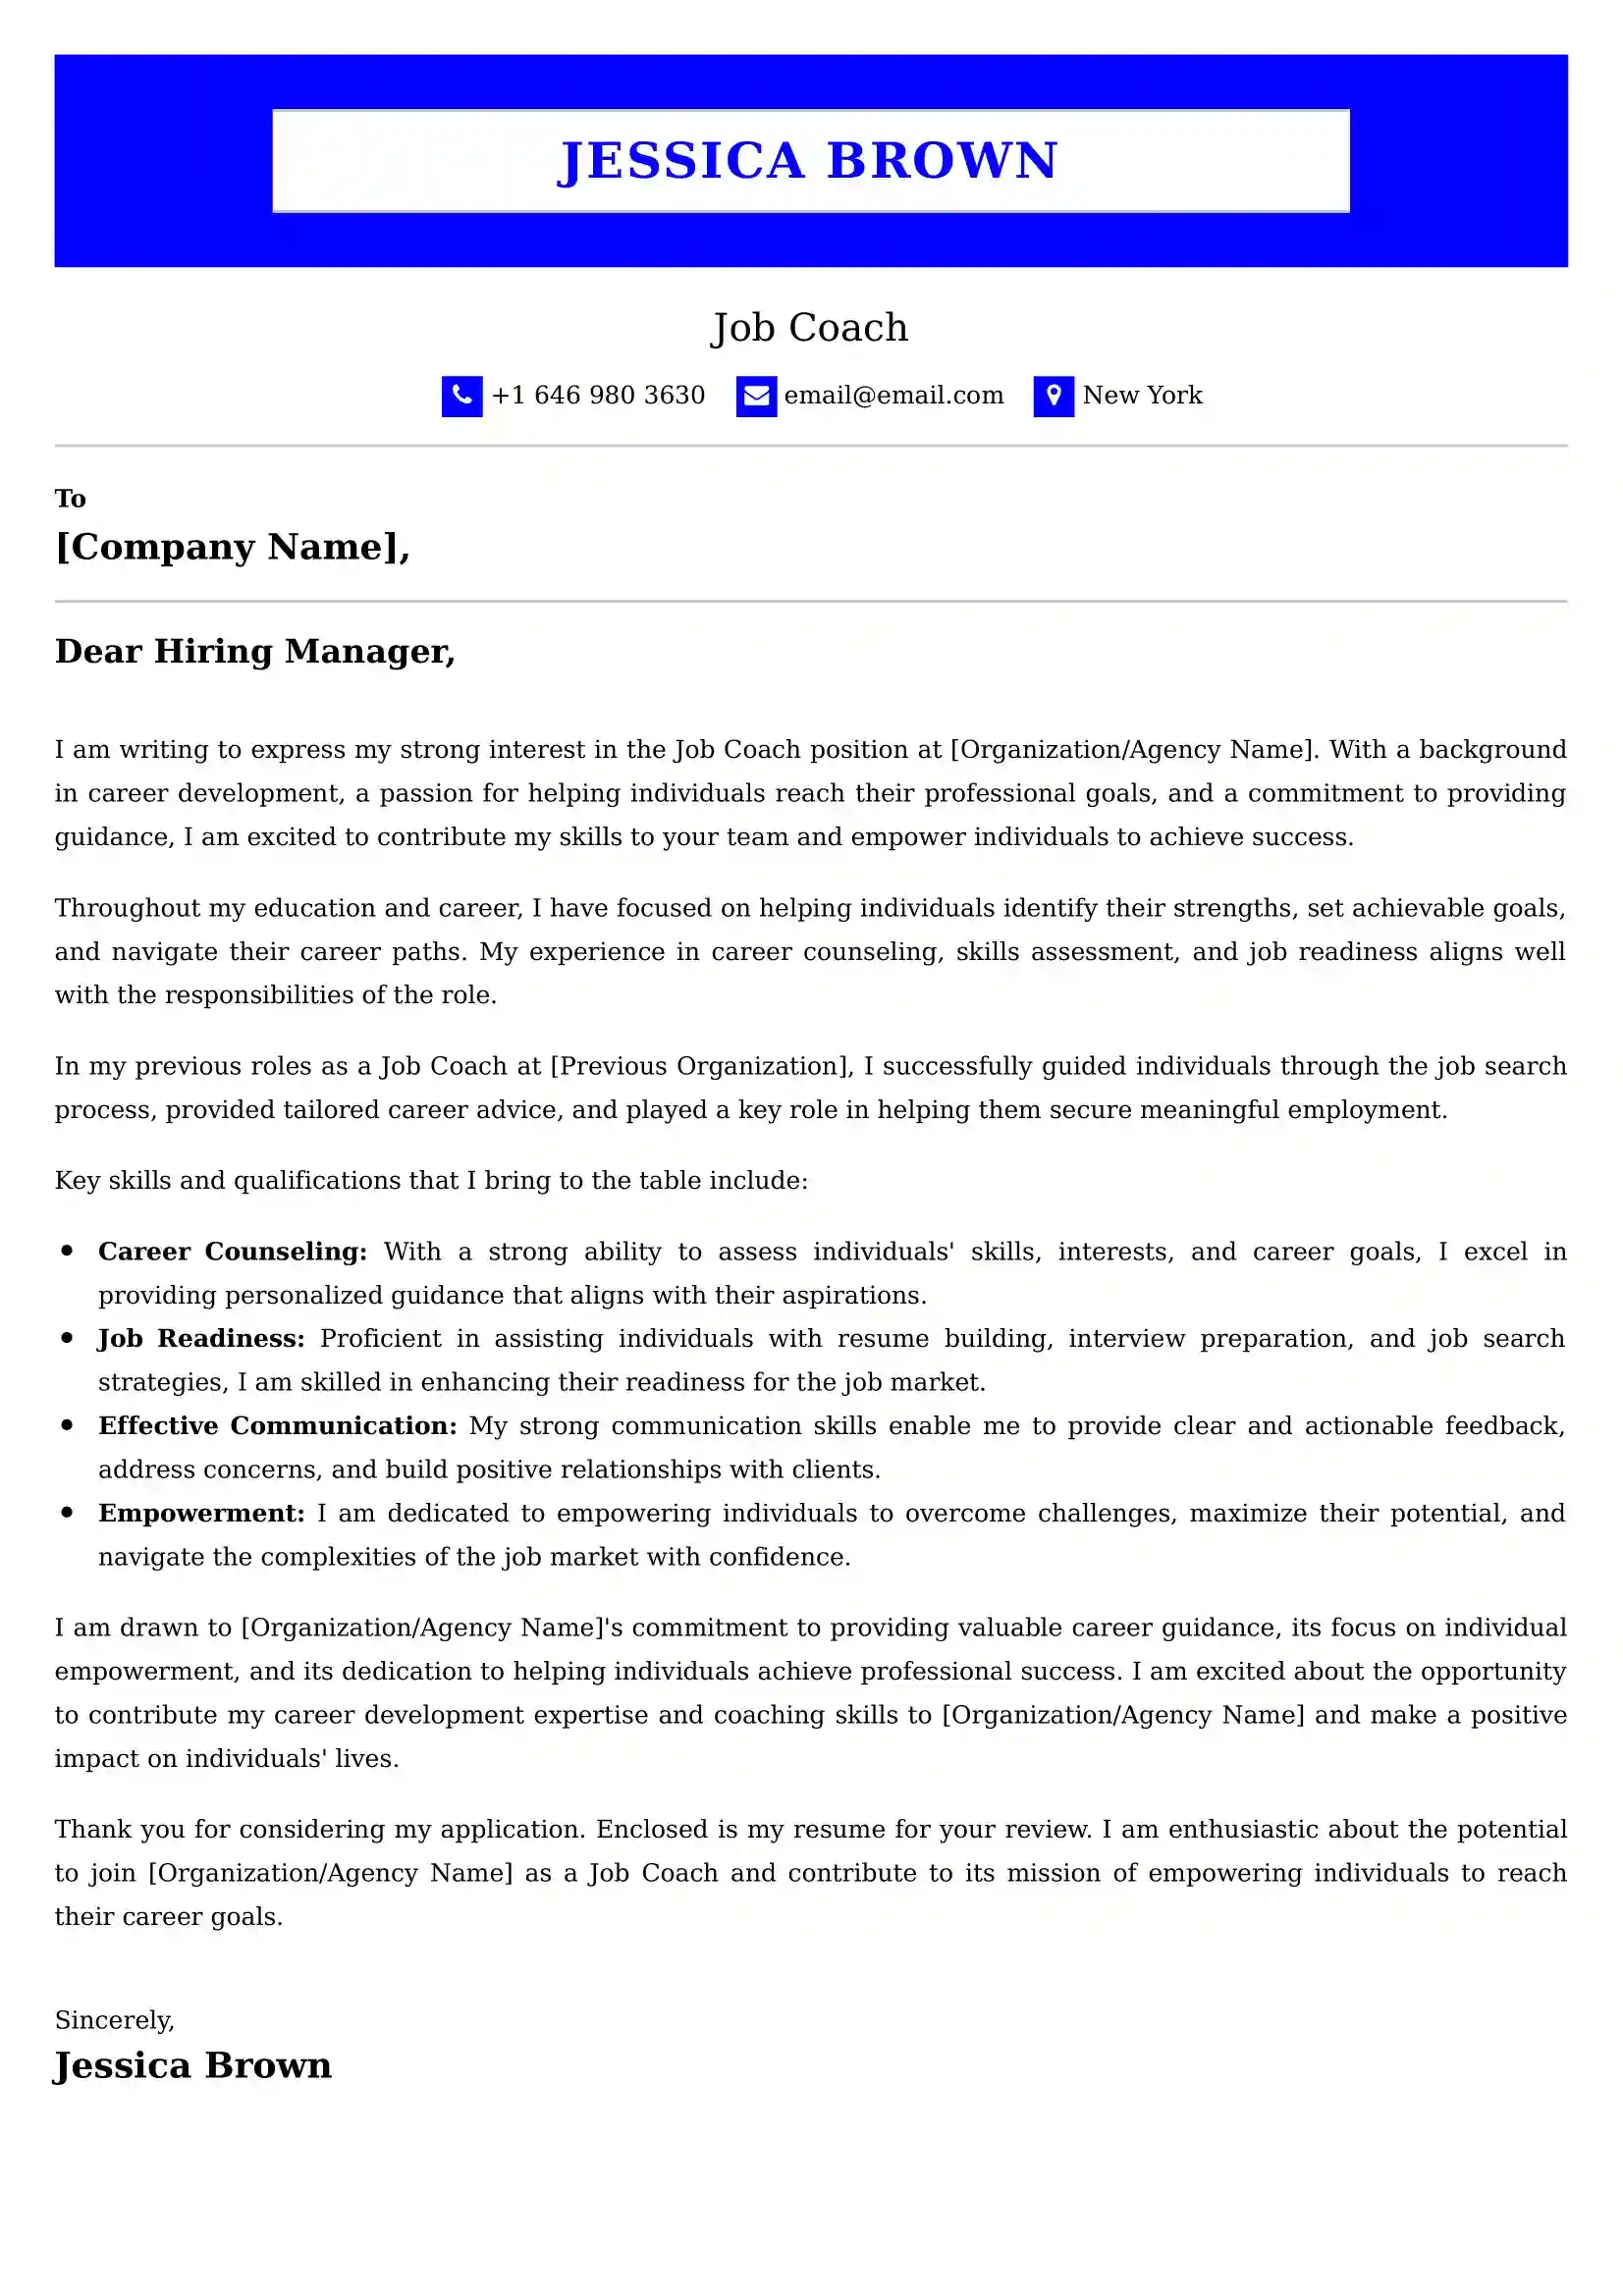 Job Coach Cover Letter Examples - US Format and Tips